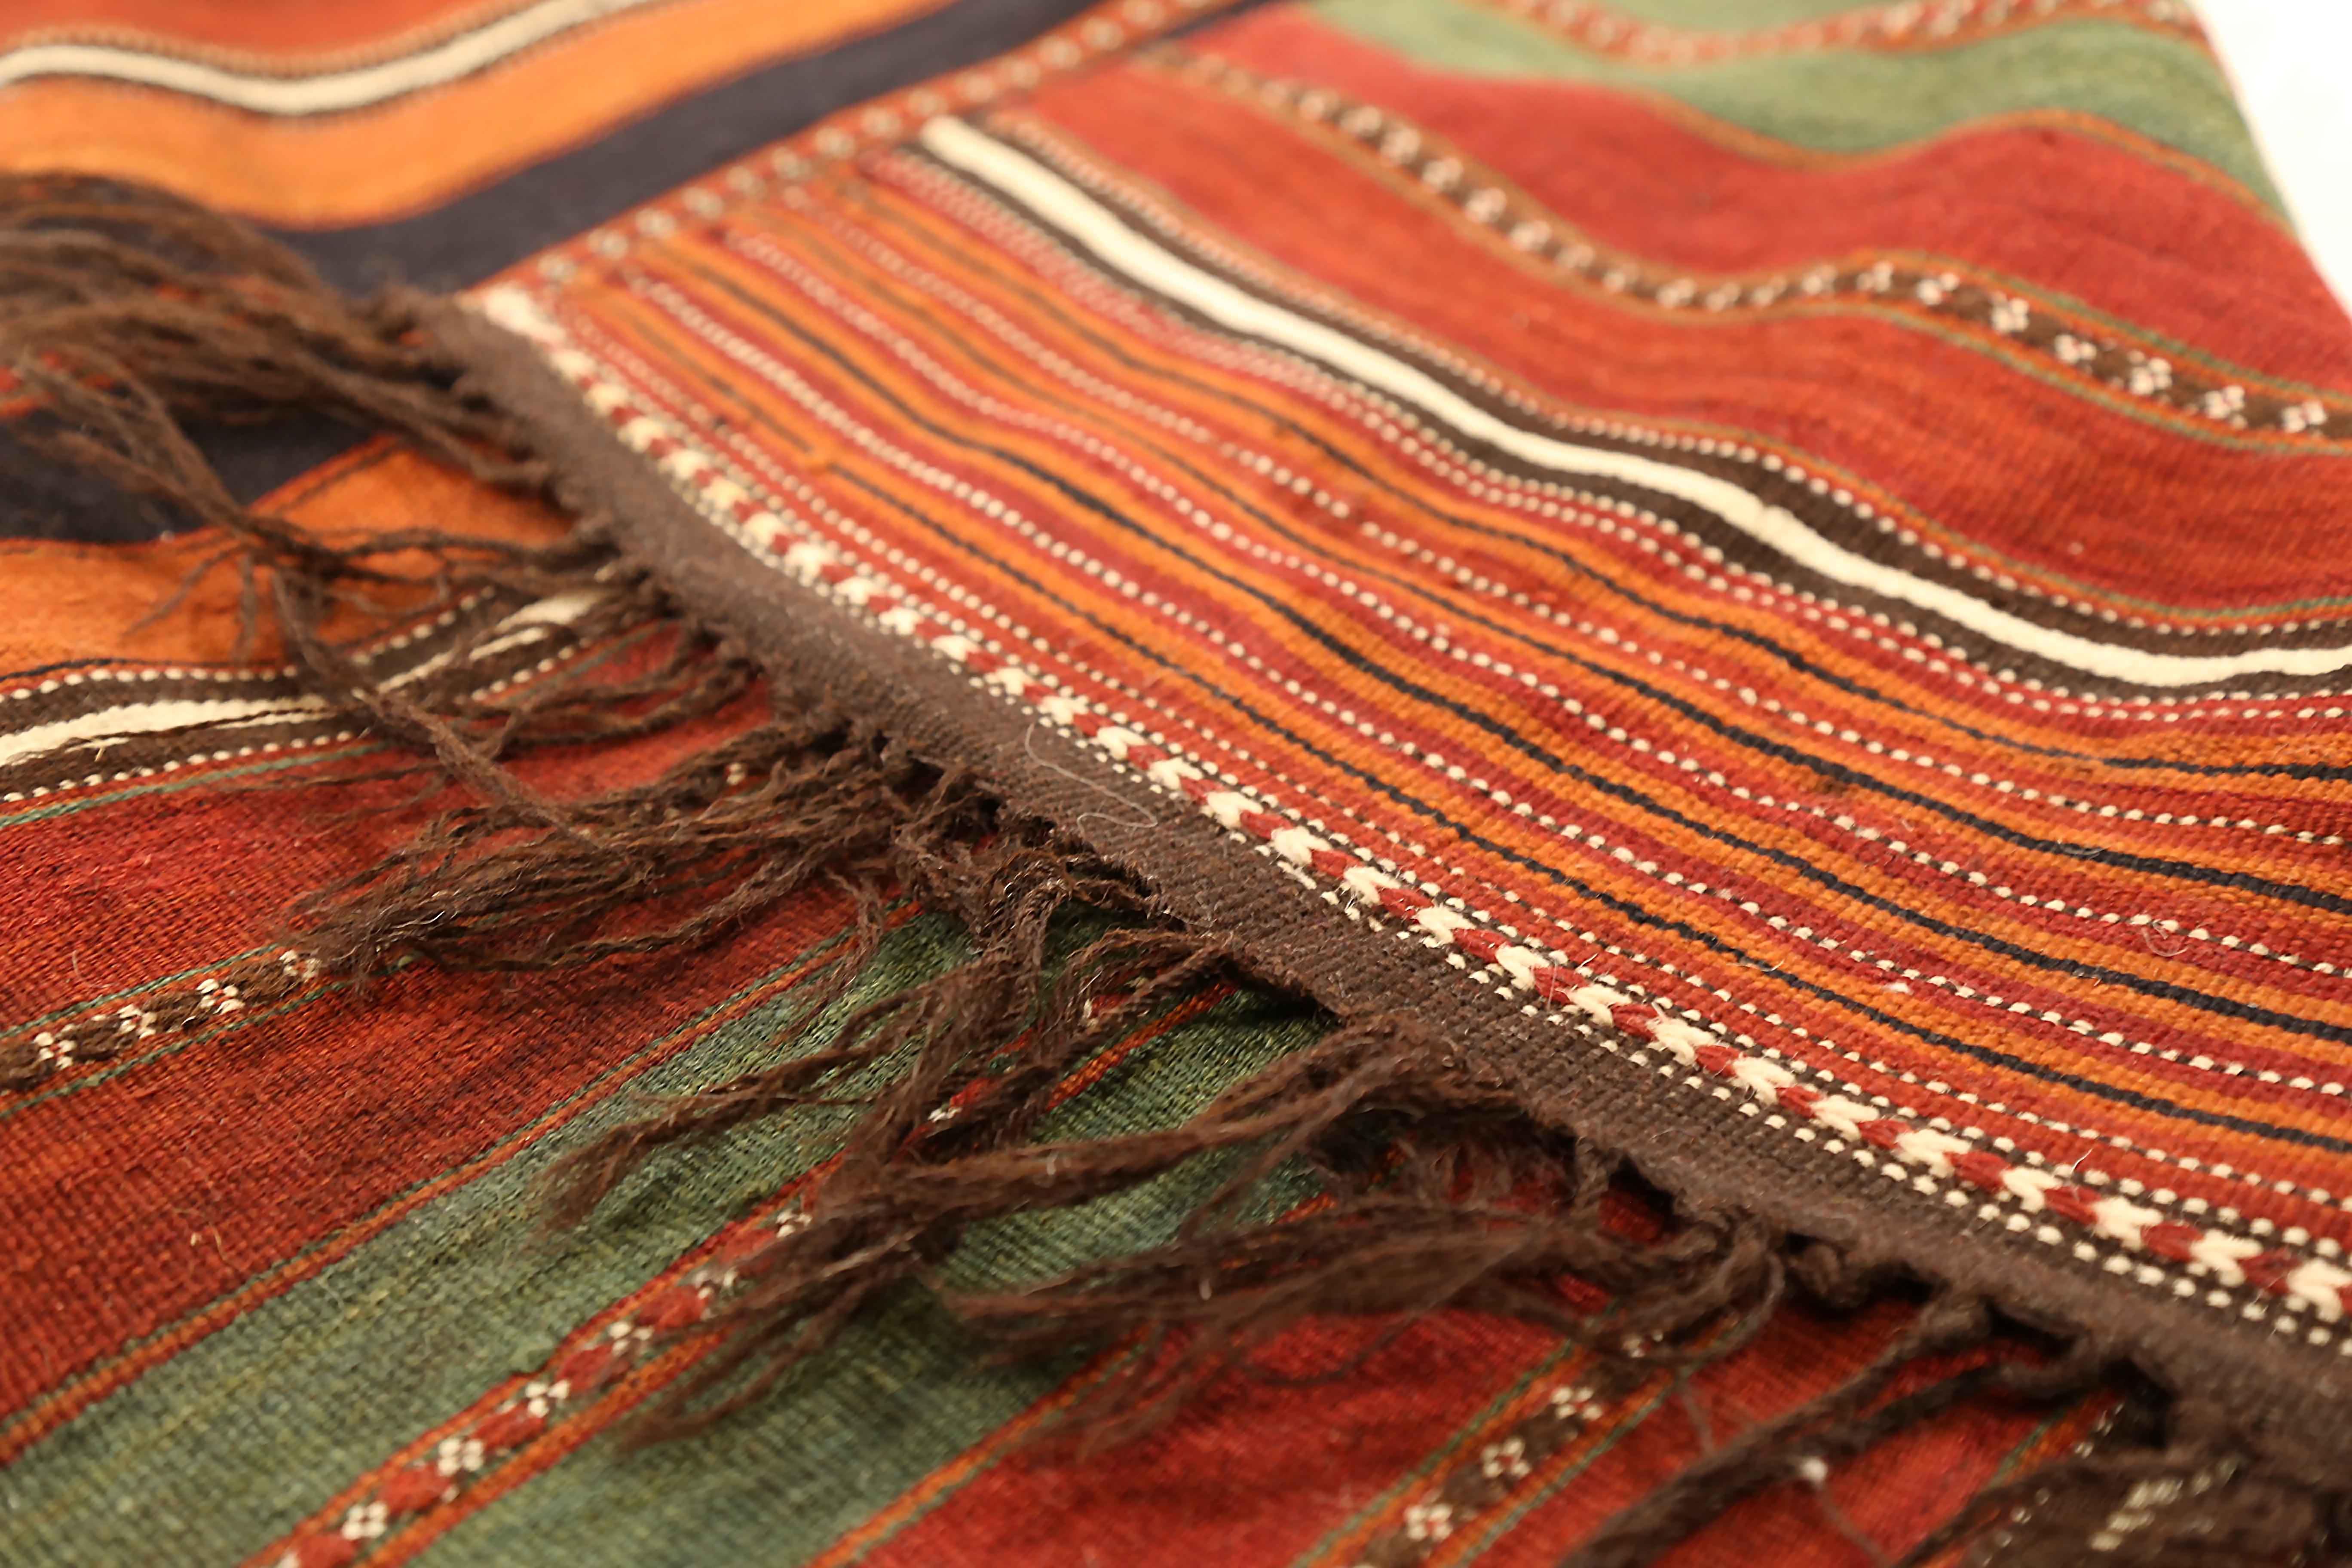 Antique Persian Kilim Runner Rug with Colored Stripes on Brown/Red Field In Excellent Condition For Sale In Dallas, TX